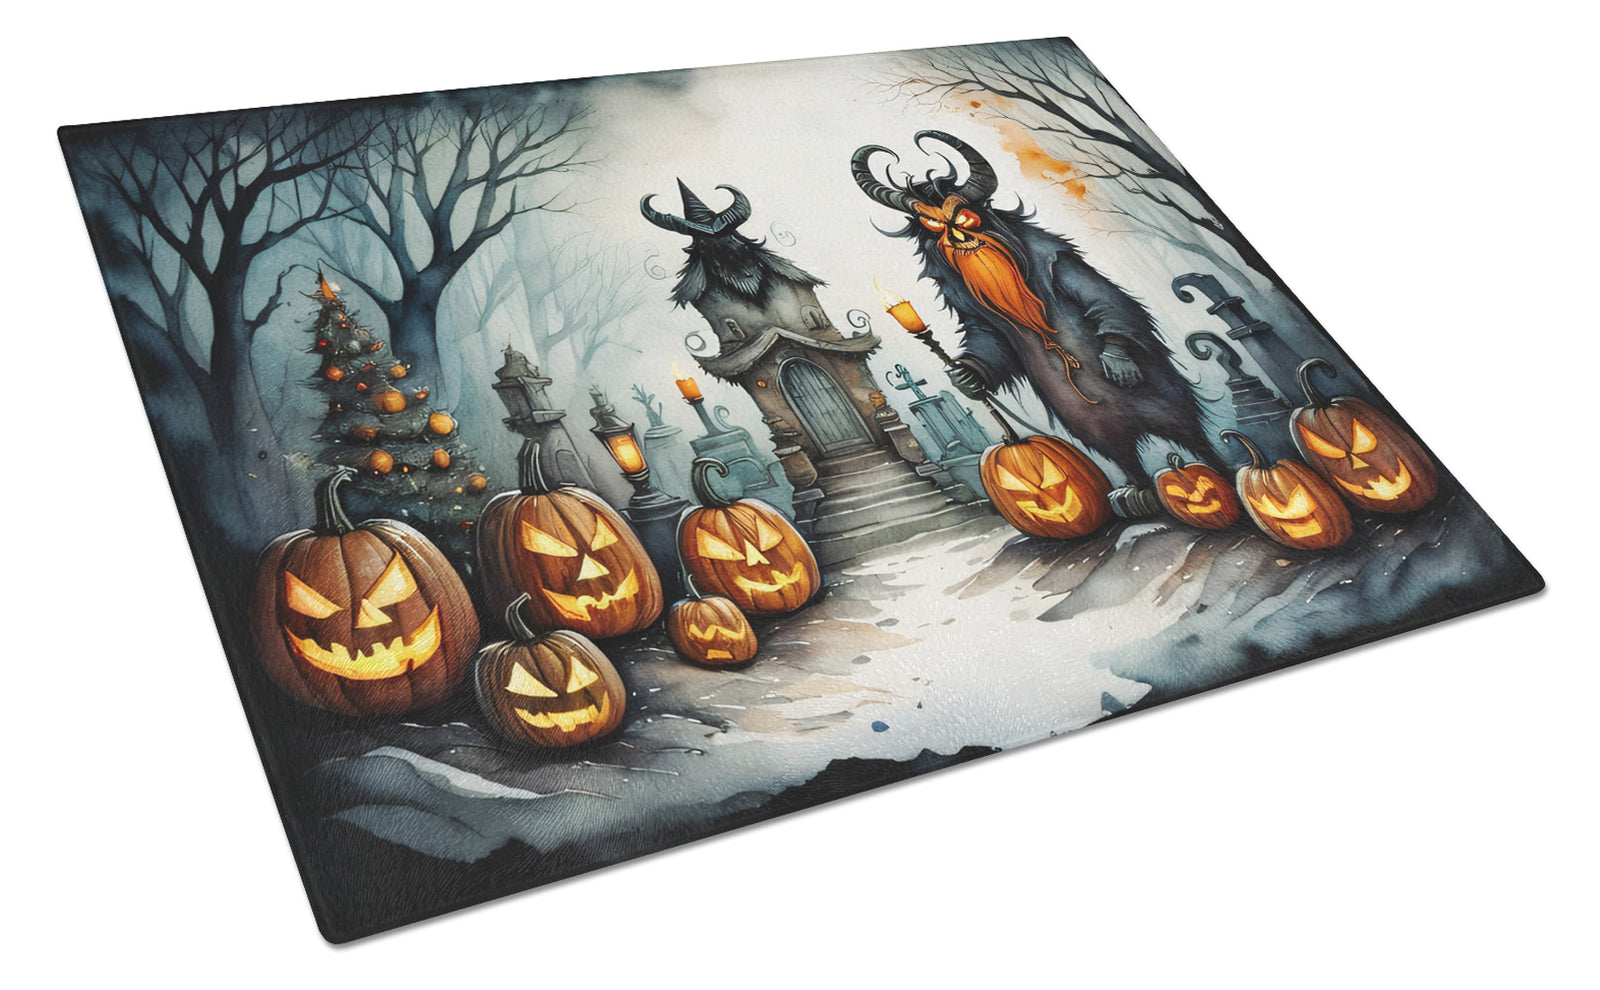 Buy this Krampus The Christmas Demon Spooky Halloween Glass Cutting Board Large